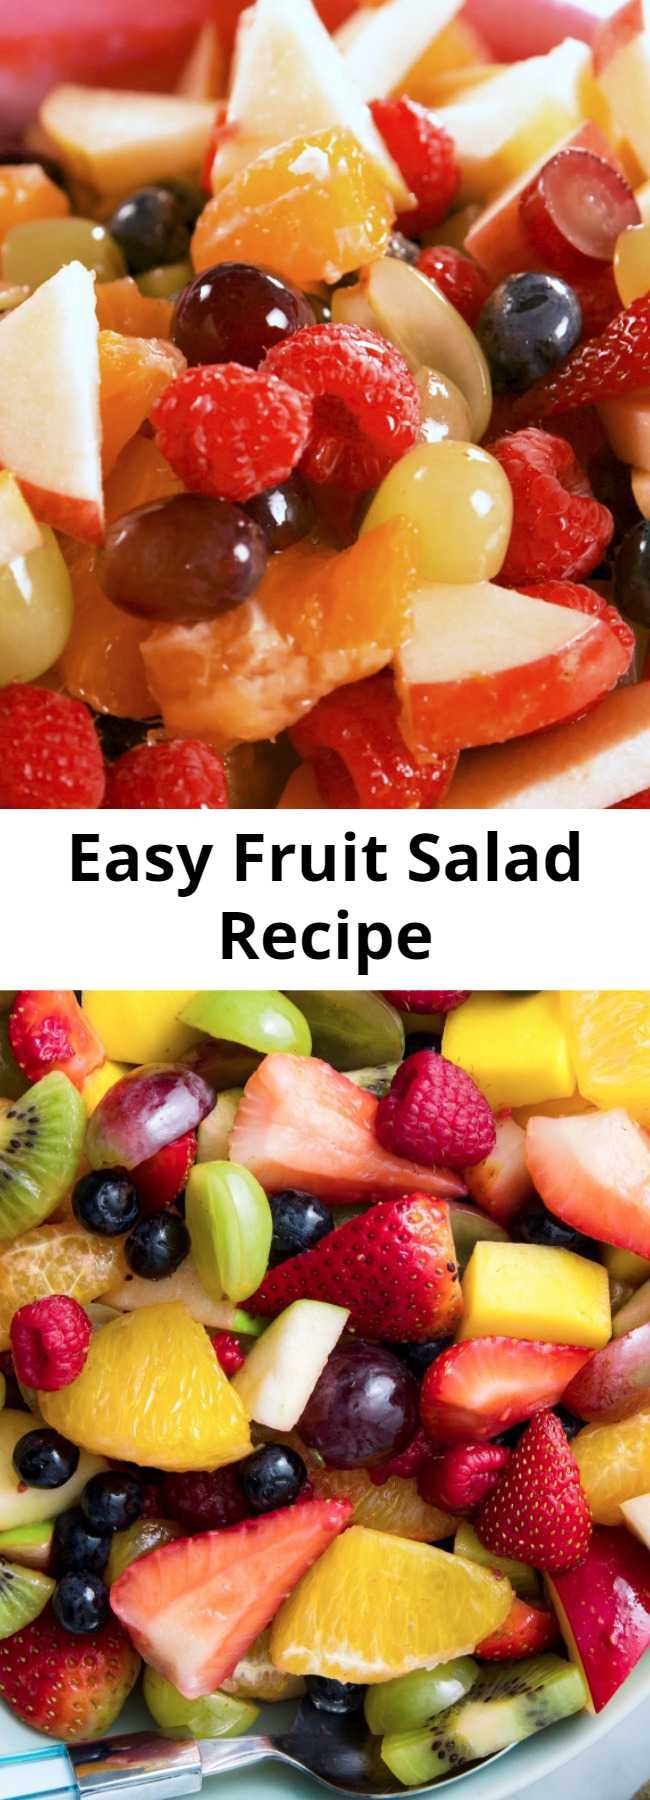 Easy Fruit Salad Recipe - Really? A recipe for fruit salad? Yes, you need it. Because this dressing takes strawberries, raspberries, and mangoes to a whole new level. #easyrecipe #fruitsalad #fruit #dessert #summer